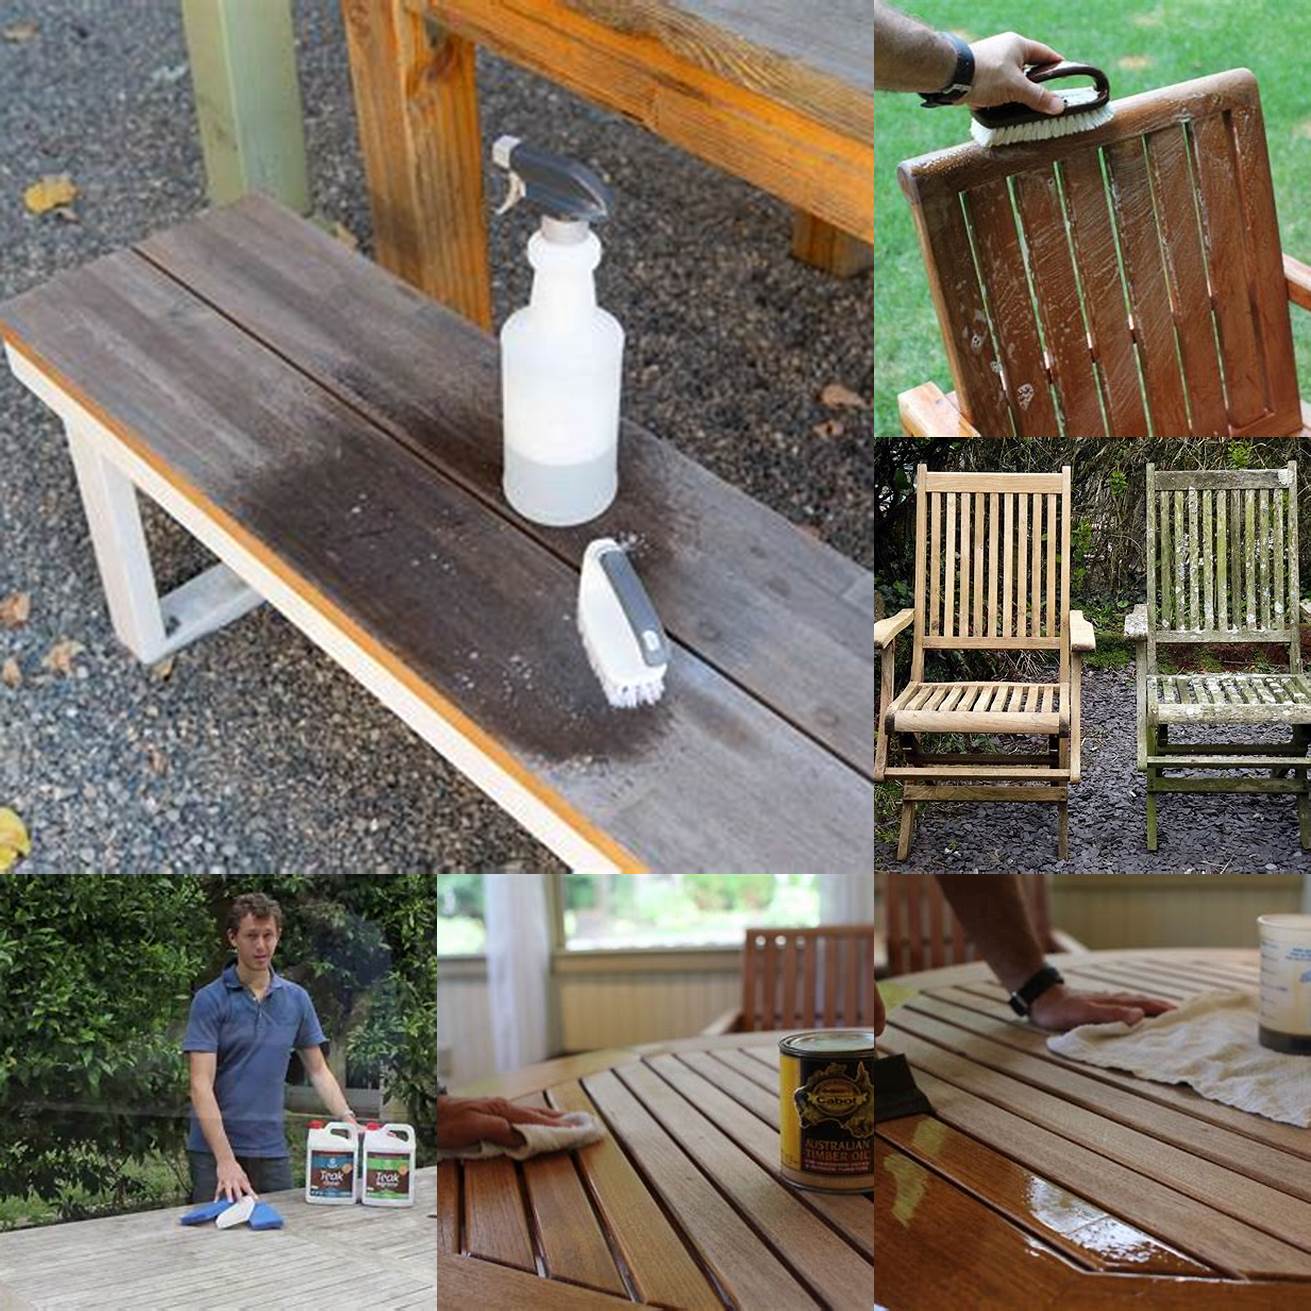 Cleaning the Teak Furniture